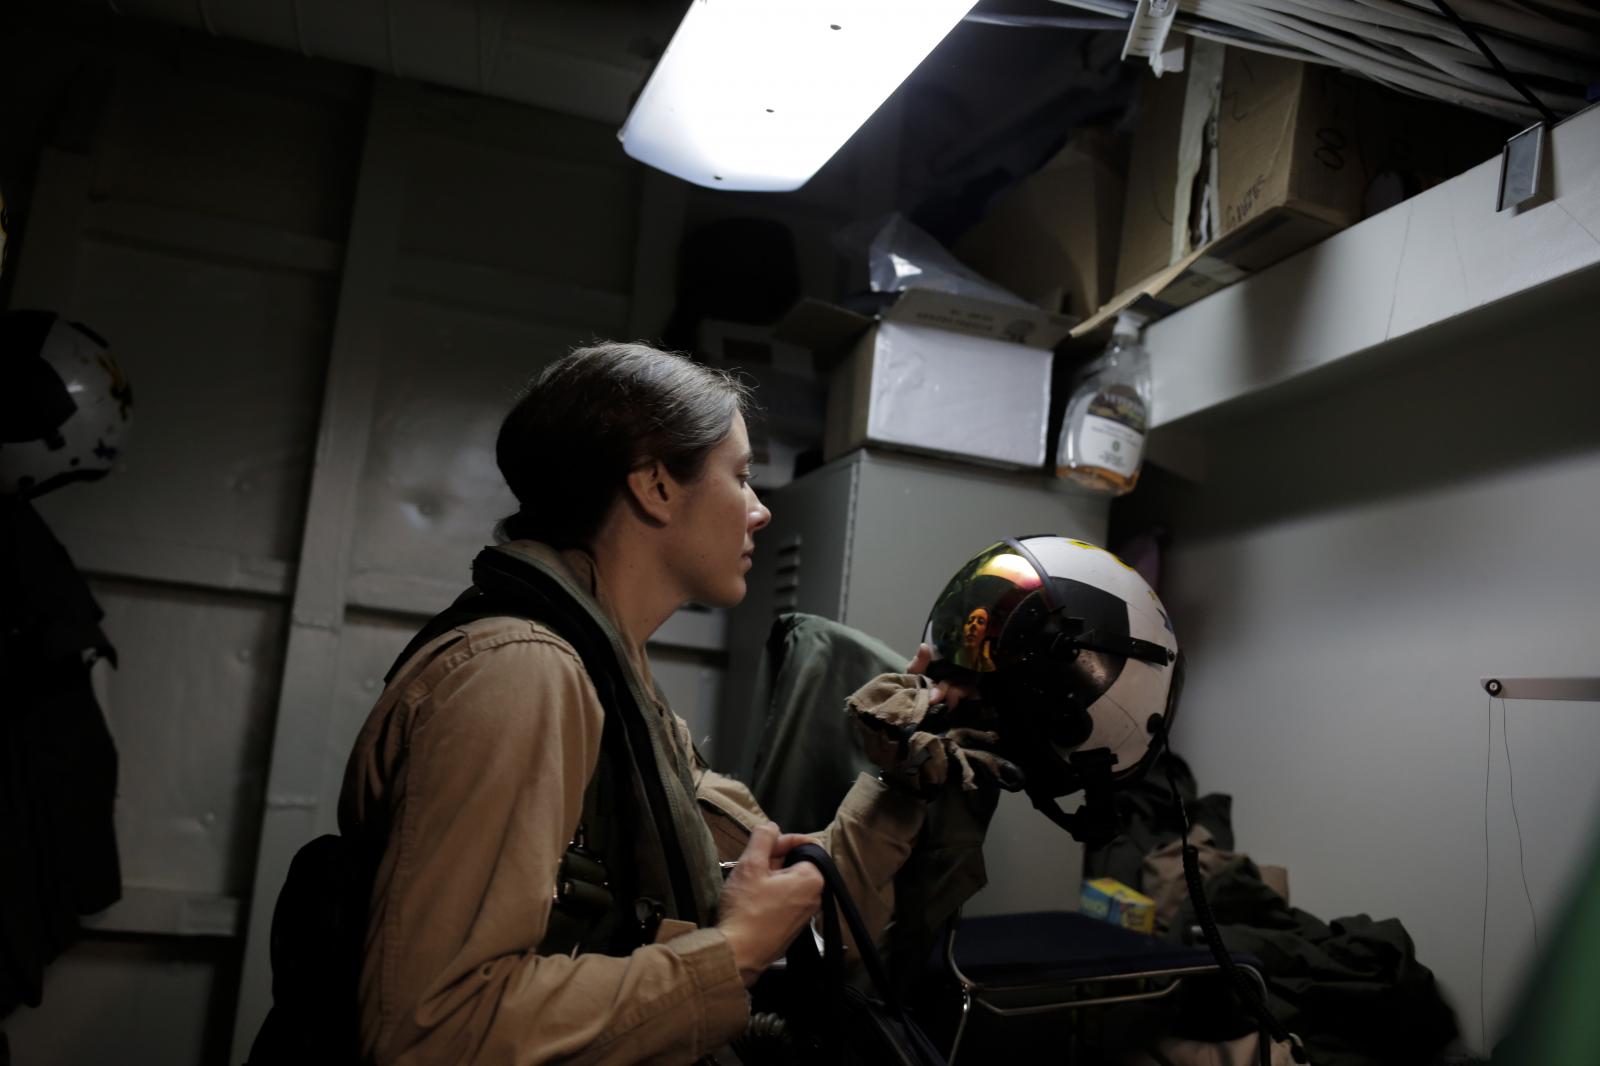 A pilot of one of the fighter jets onboard the USS George H.W. Bush aircraft carrier, looks at herself in the reflection of her helmet as she prepares for a take off.